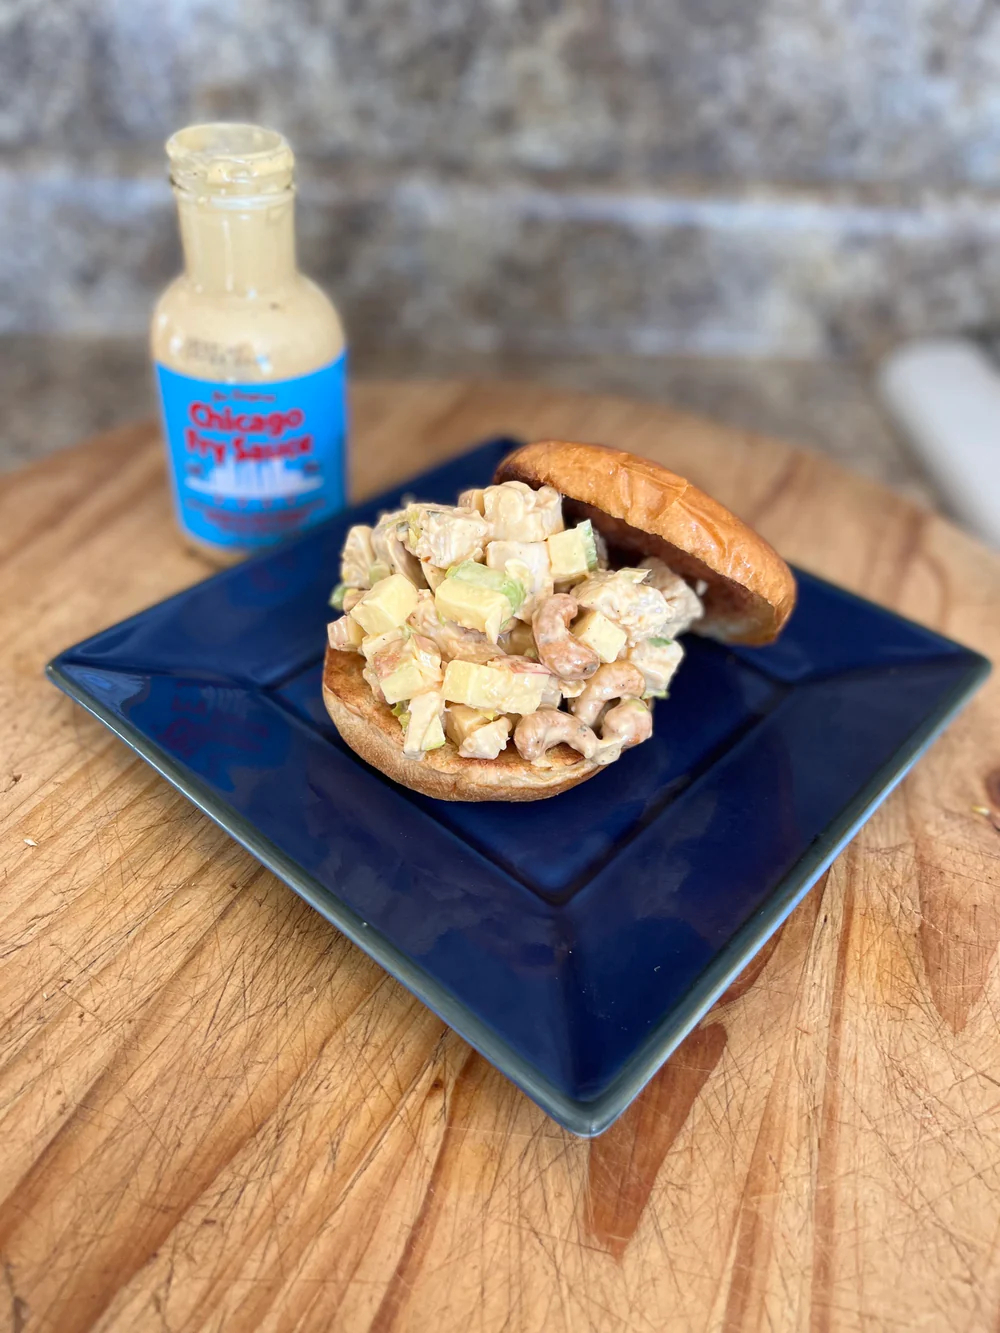 Image of  5 INGREDIENTS CHICKEN, APPLE & CASHEW SALAD - USING CHICAGO FRY SAUCE FROM BIG FORK BRANDS